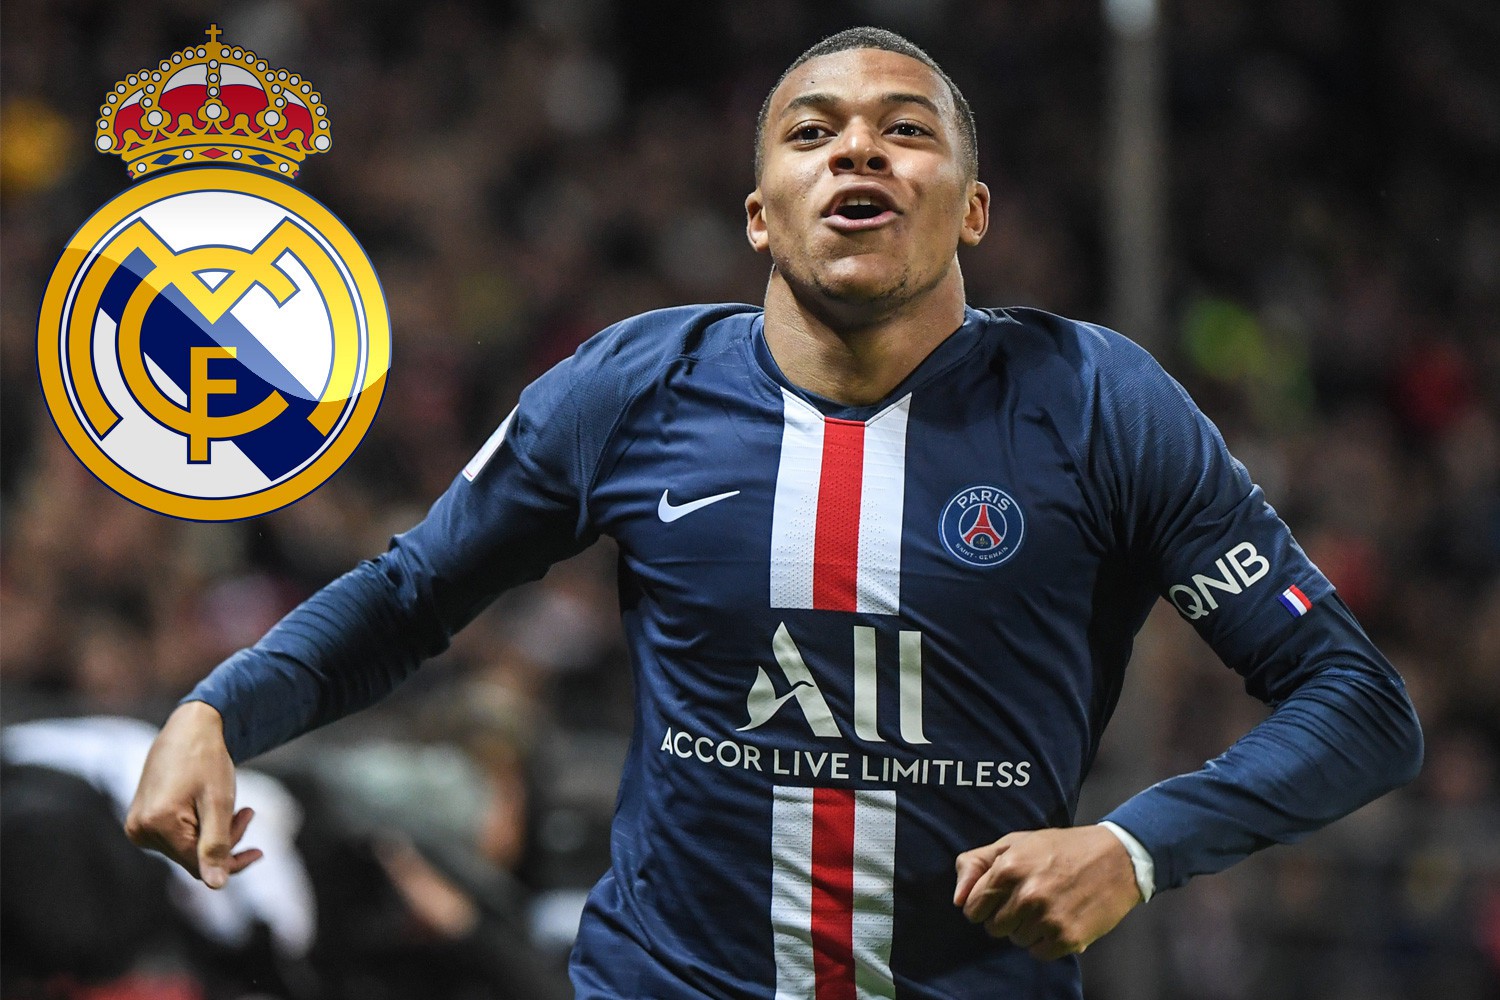 , Mbappe claimed Real Madrid will wait for me before he joined PSG says Monaco chief in transfer blow to Man Utd